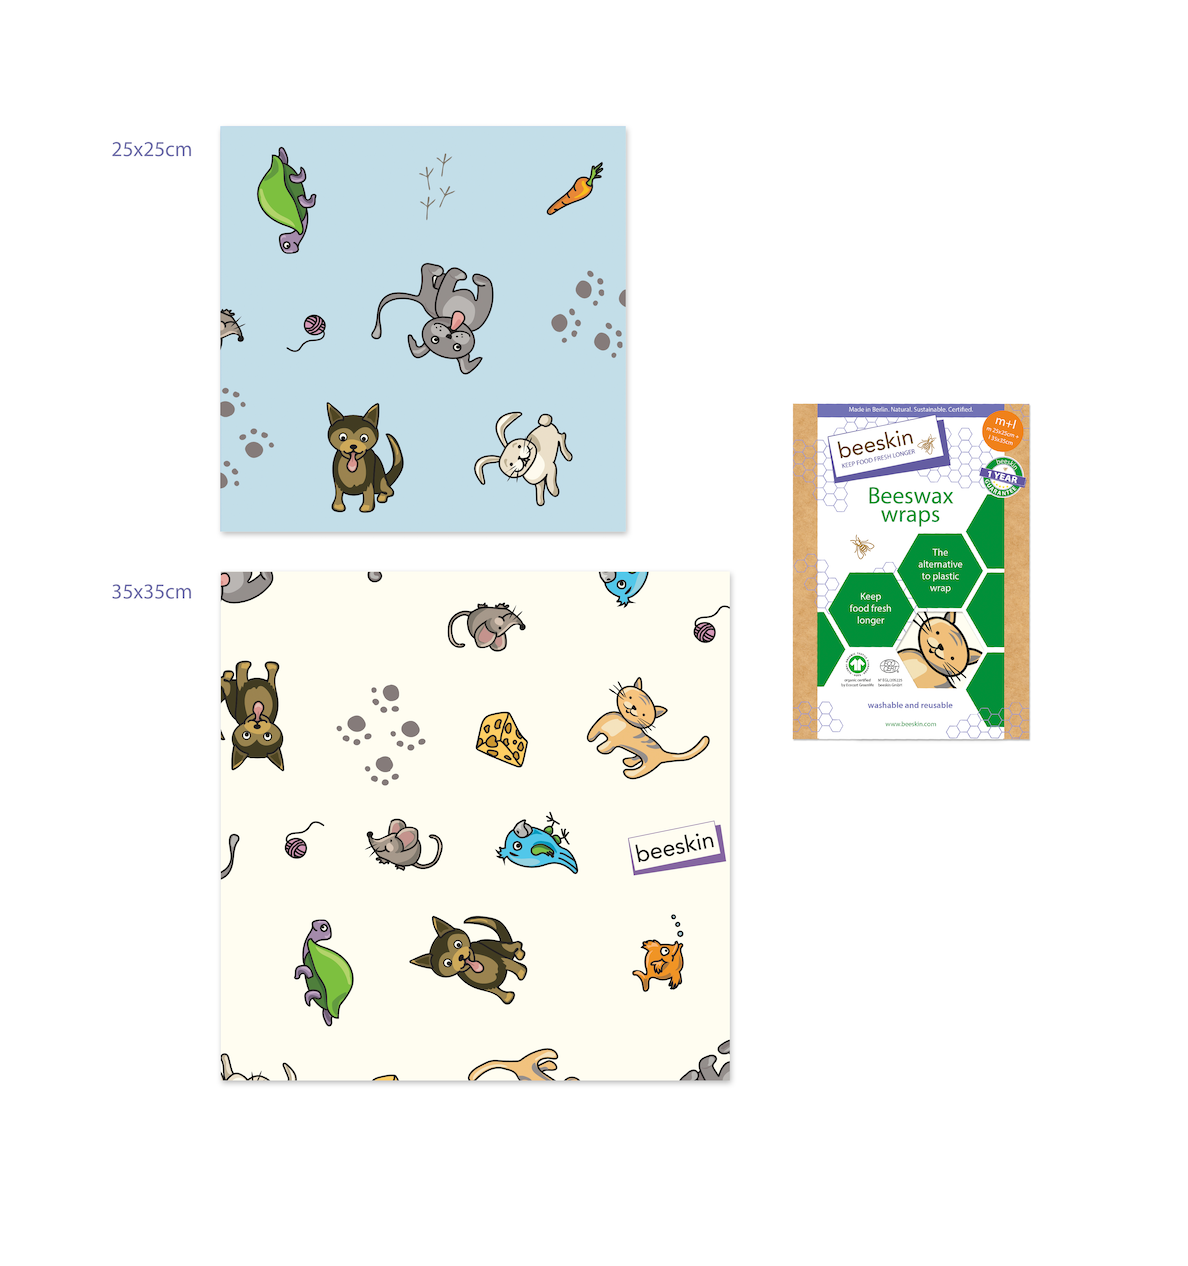 beeswax wraps size m and l with colorful pets on it next to package